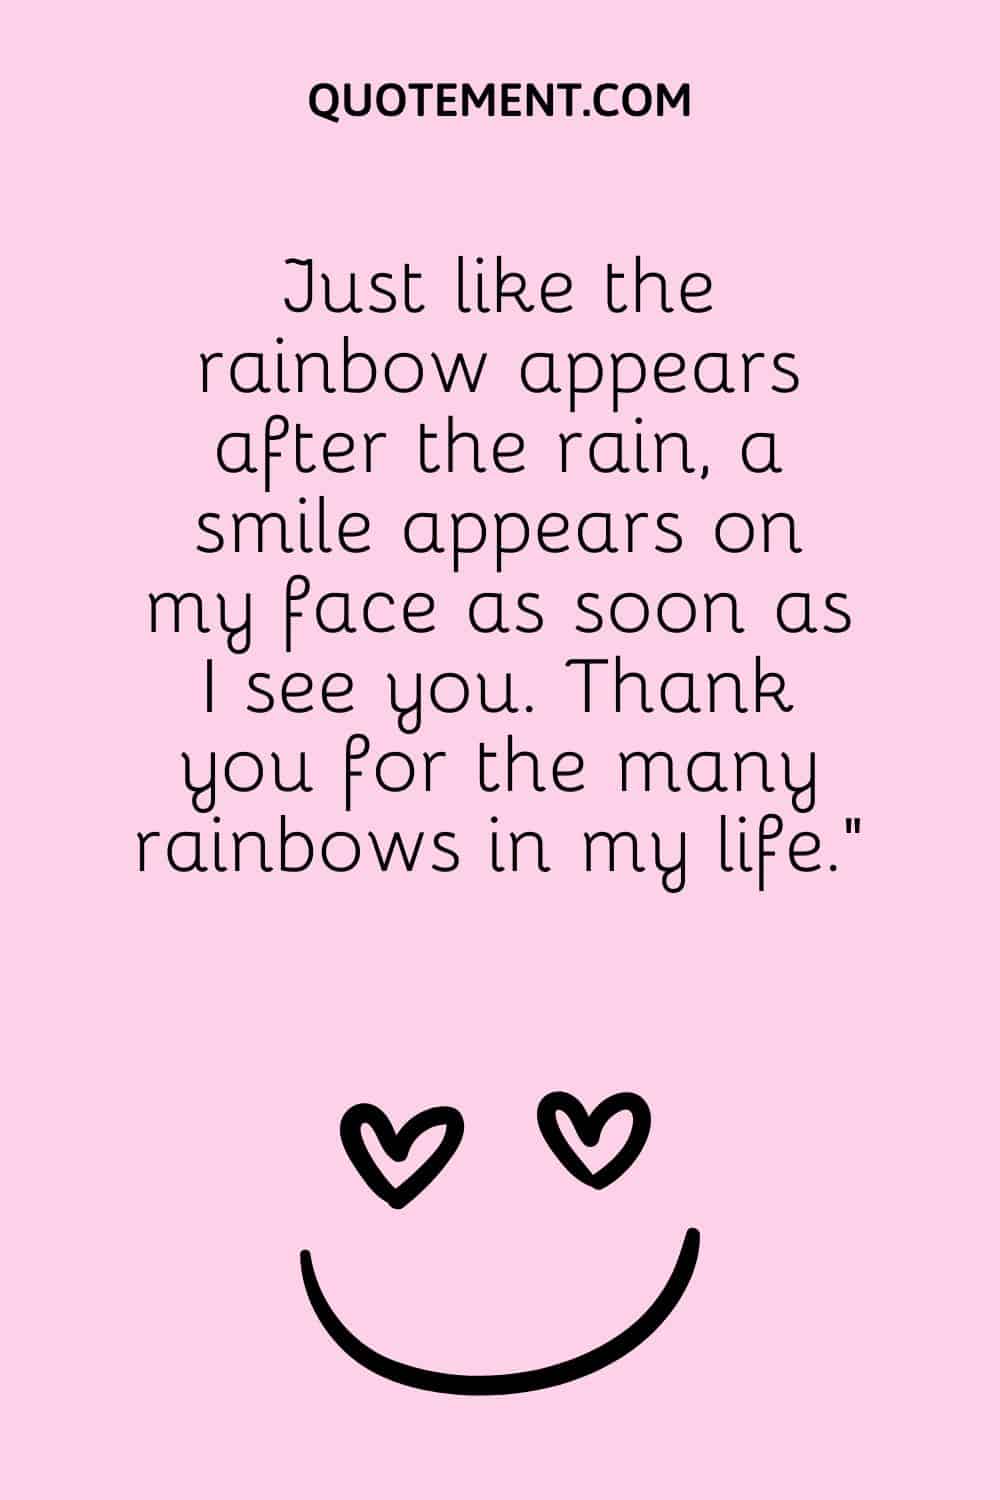 Just like the rainbow appears after the rain, a smile appears on my face as soon as I see you